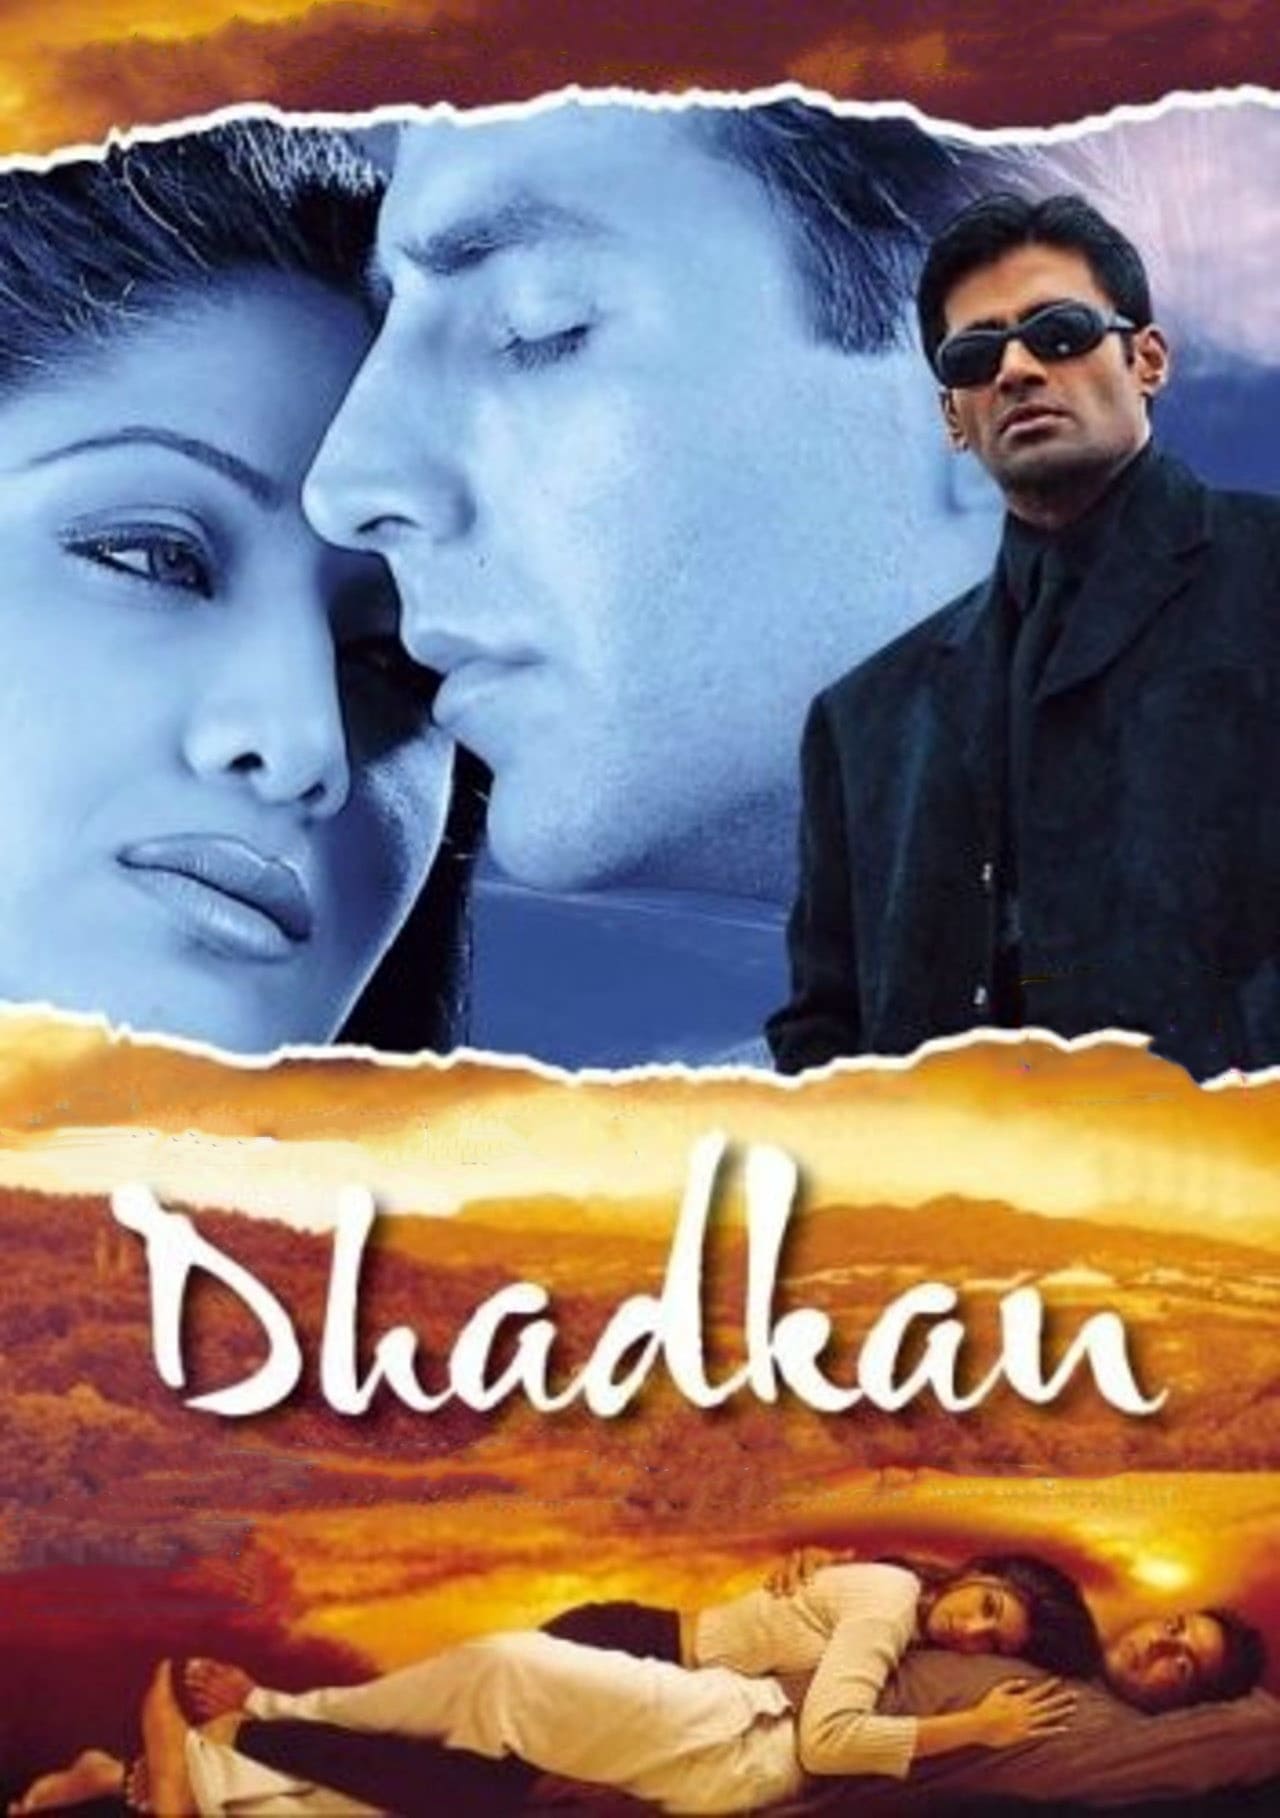 Poster for the movie "Dhadkan"